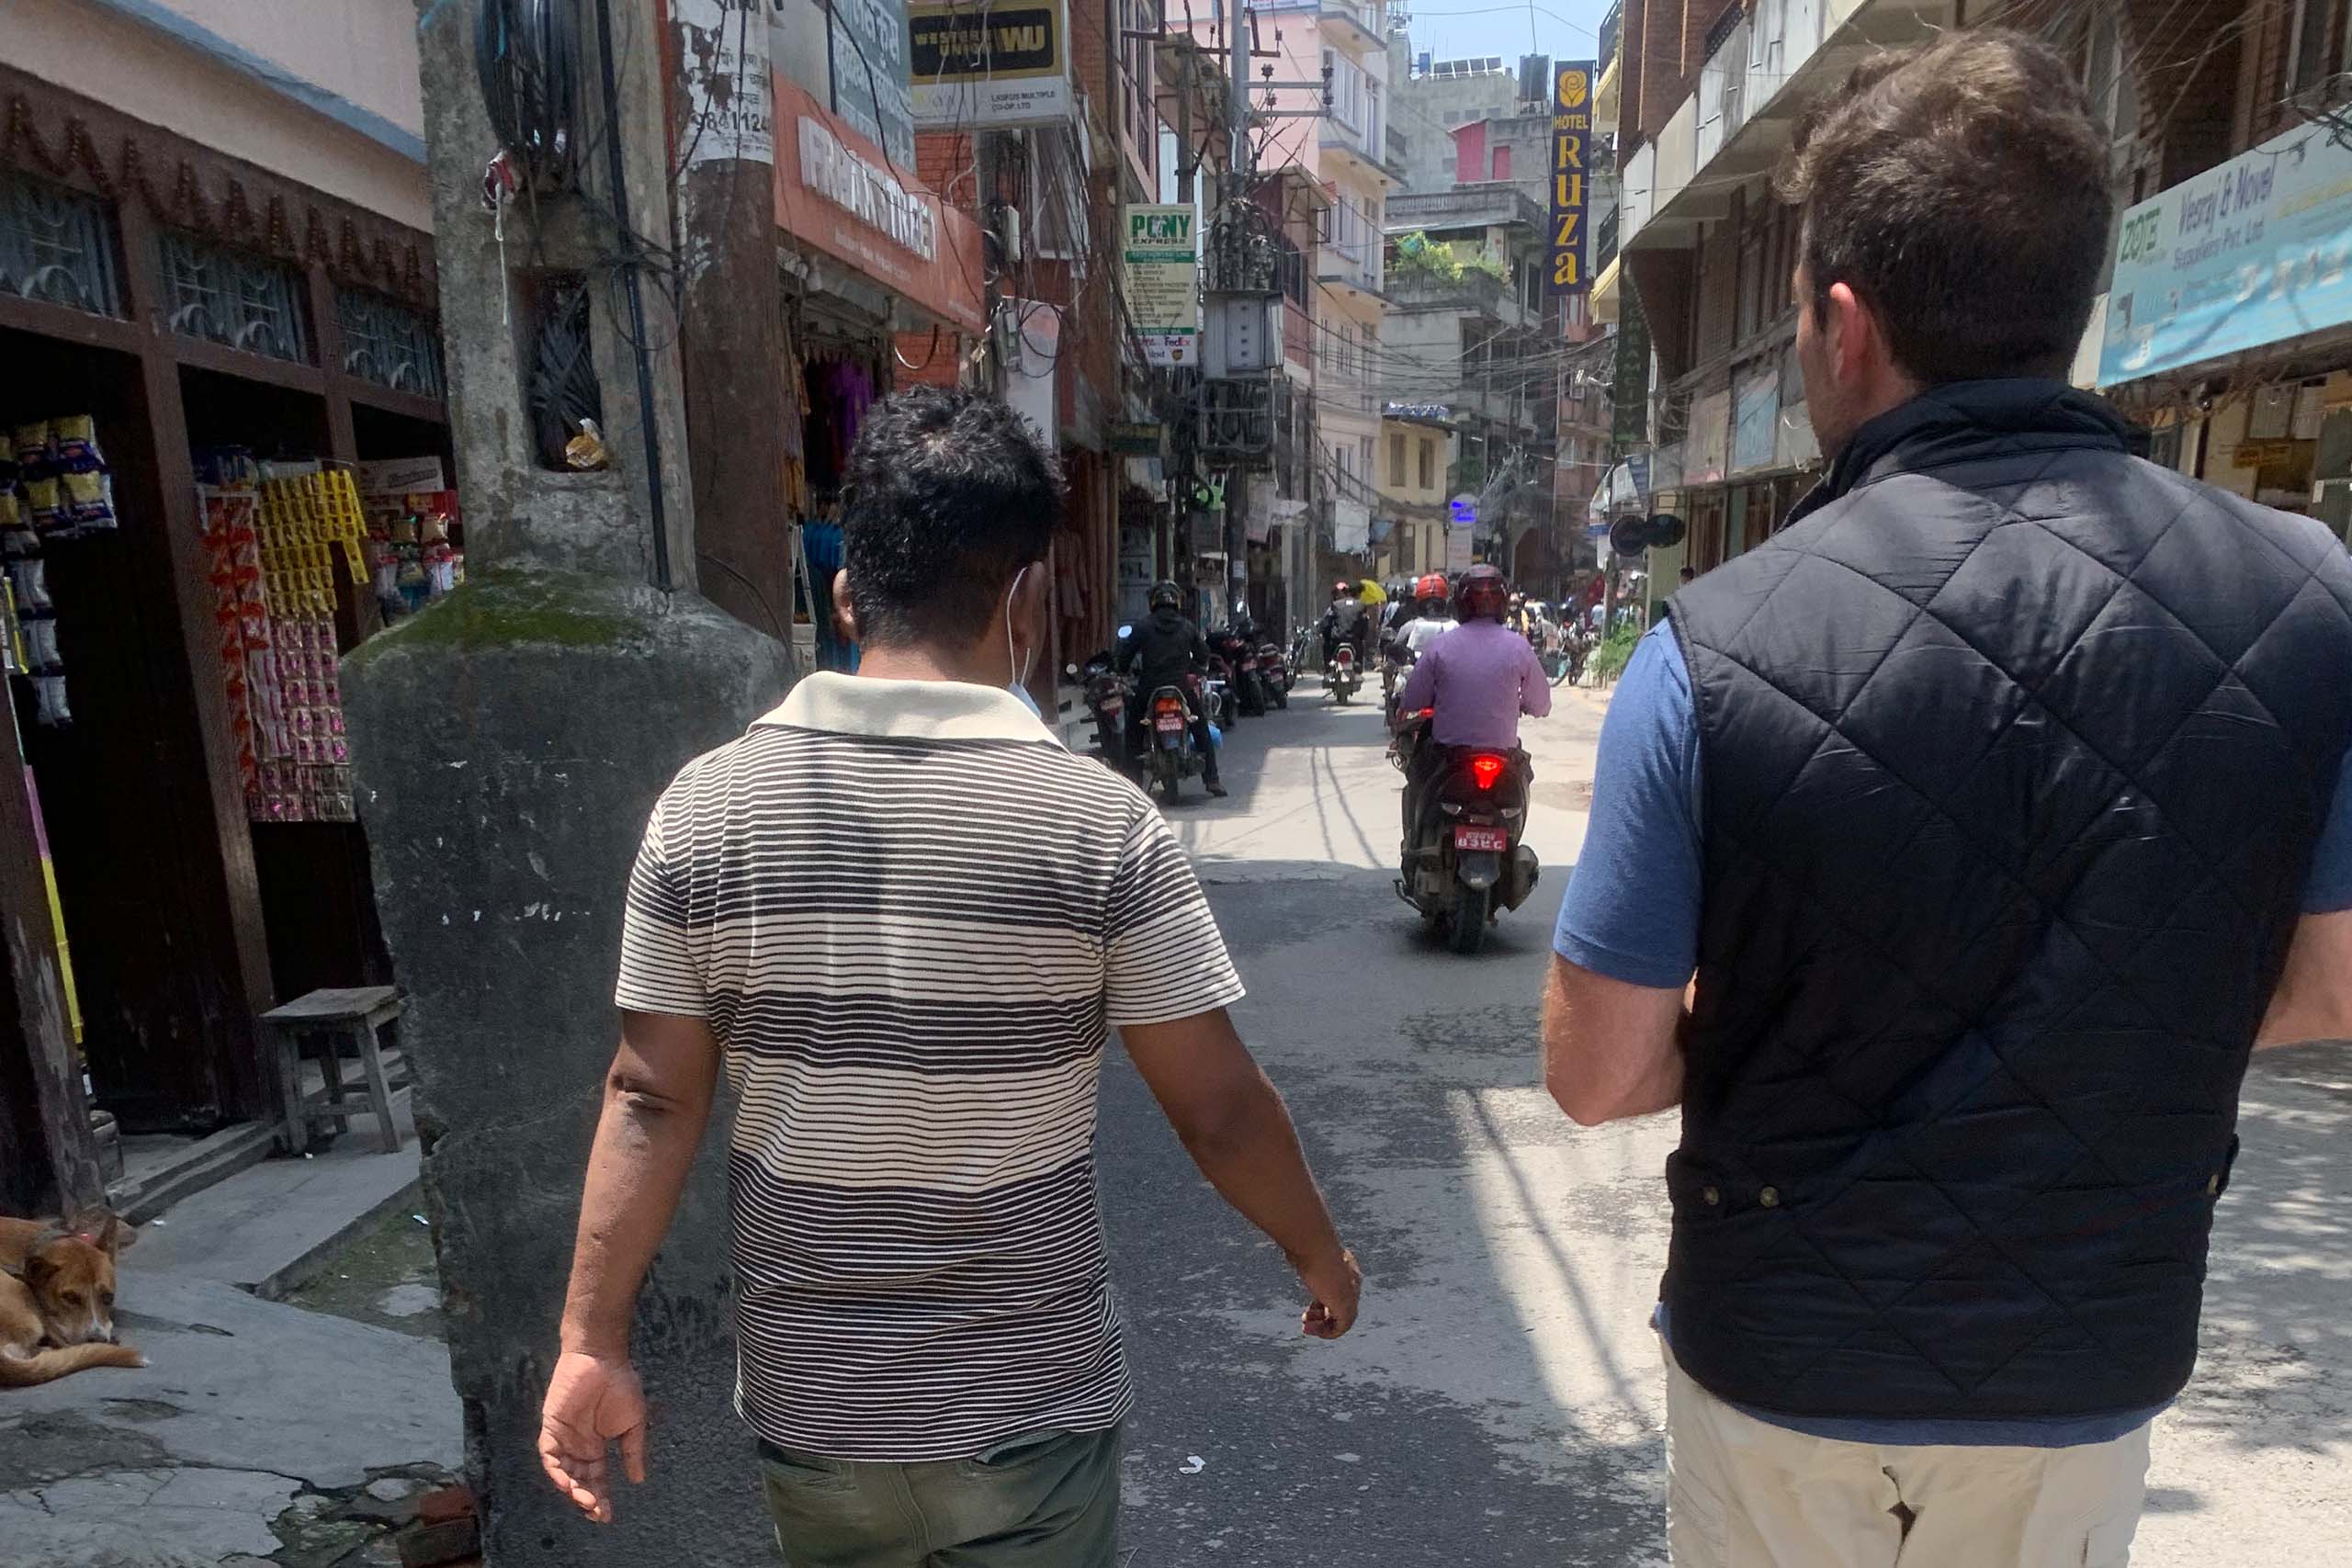 In Kathmandu, where modern amenities are intertwined with historic structures. “History is close in places like Nepal,” Coles says, “in a way that we don’t experience here.”